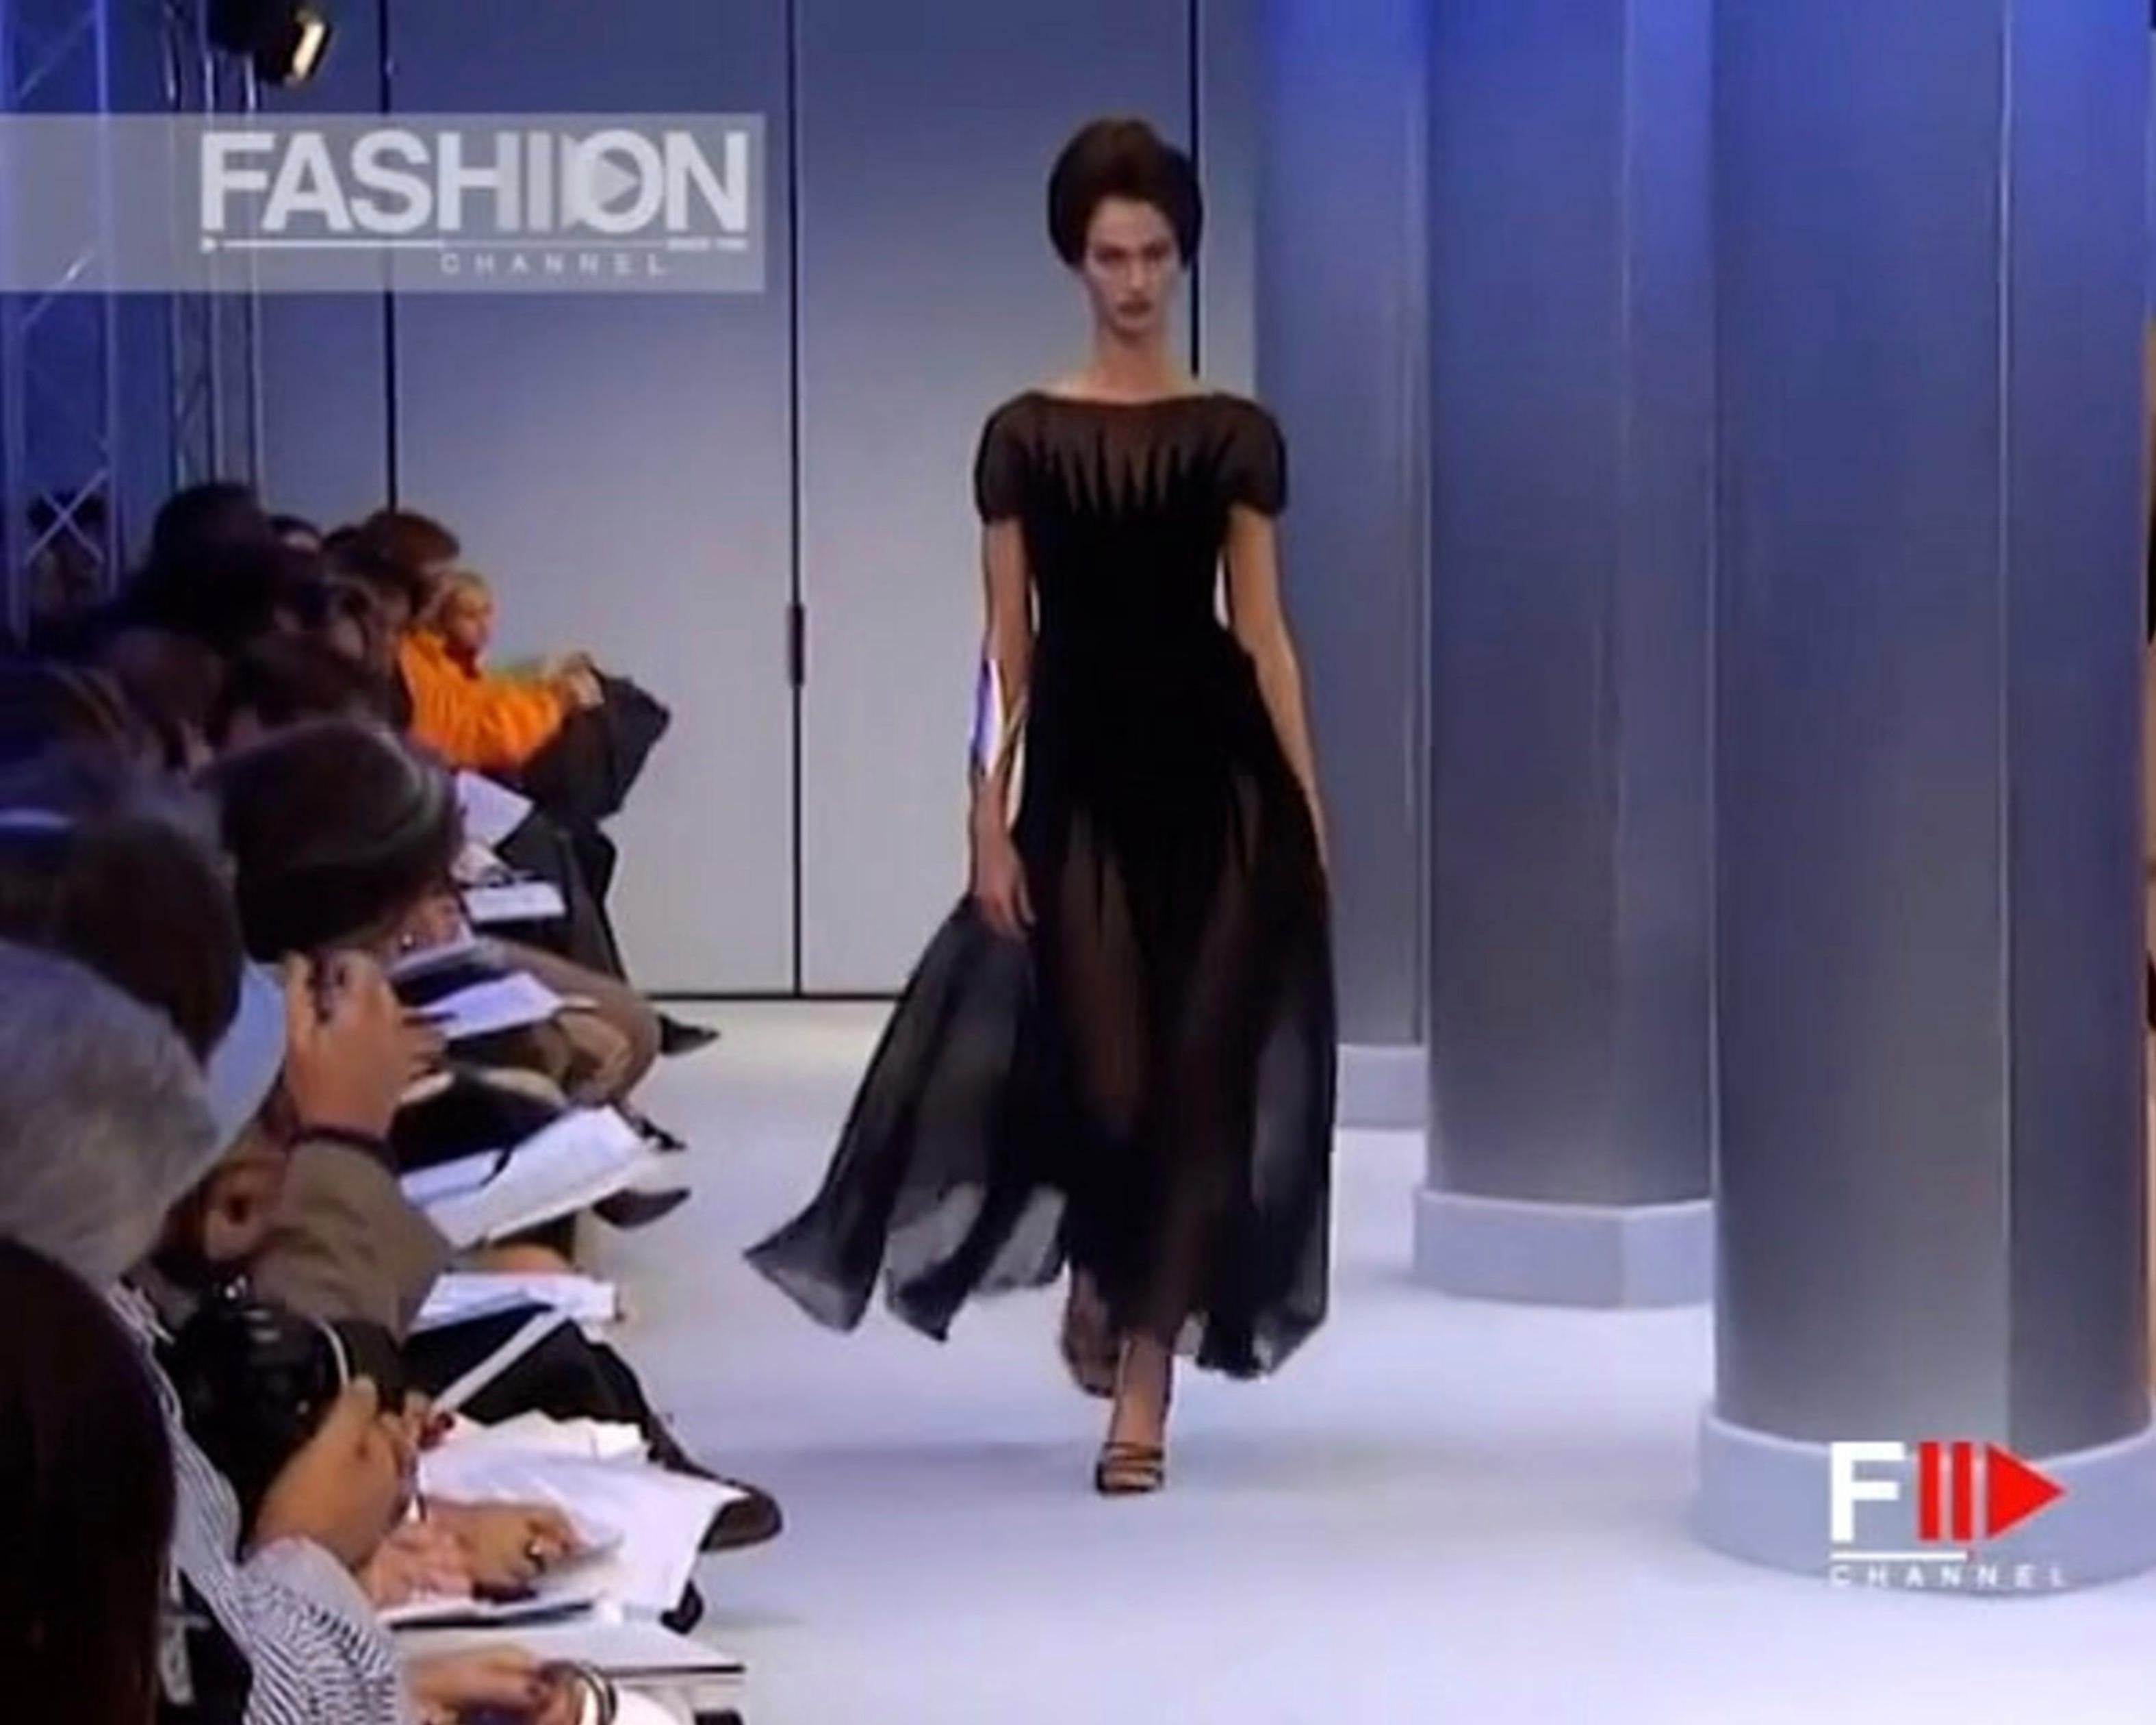 
Thierry Mugler Spring Summer 2000 Collection. This Runway documented piece is so devine.
Long semi sheer evening gown with the most amazing movement when walking. So elegant and sexy - black evening dress with the most delicate semi sheer